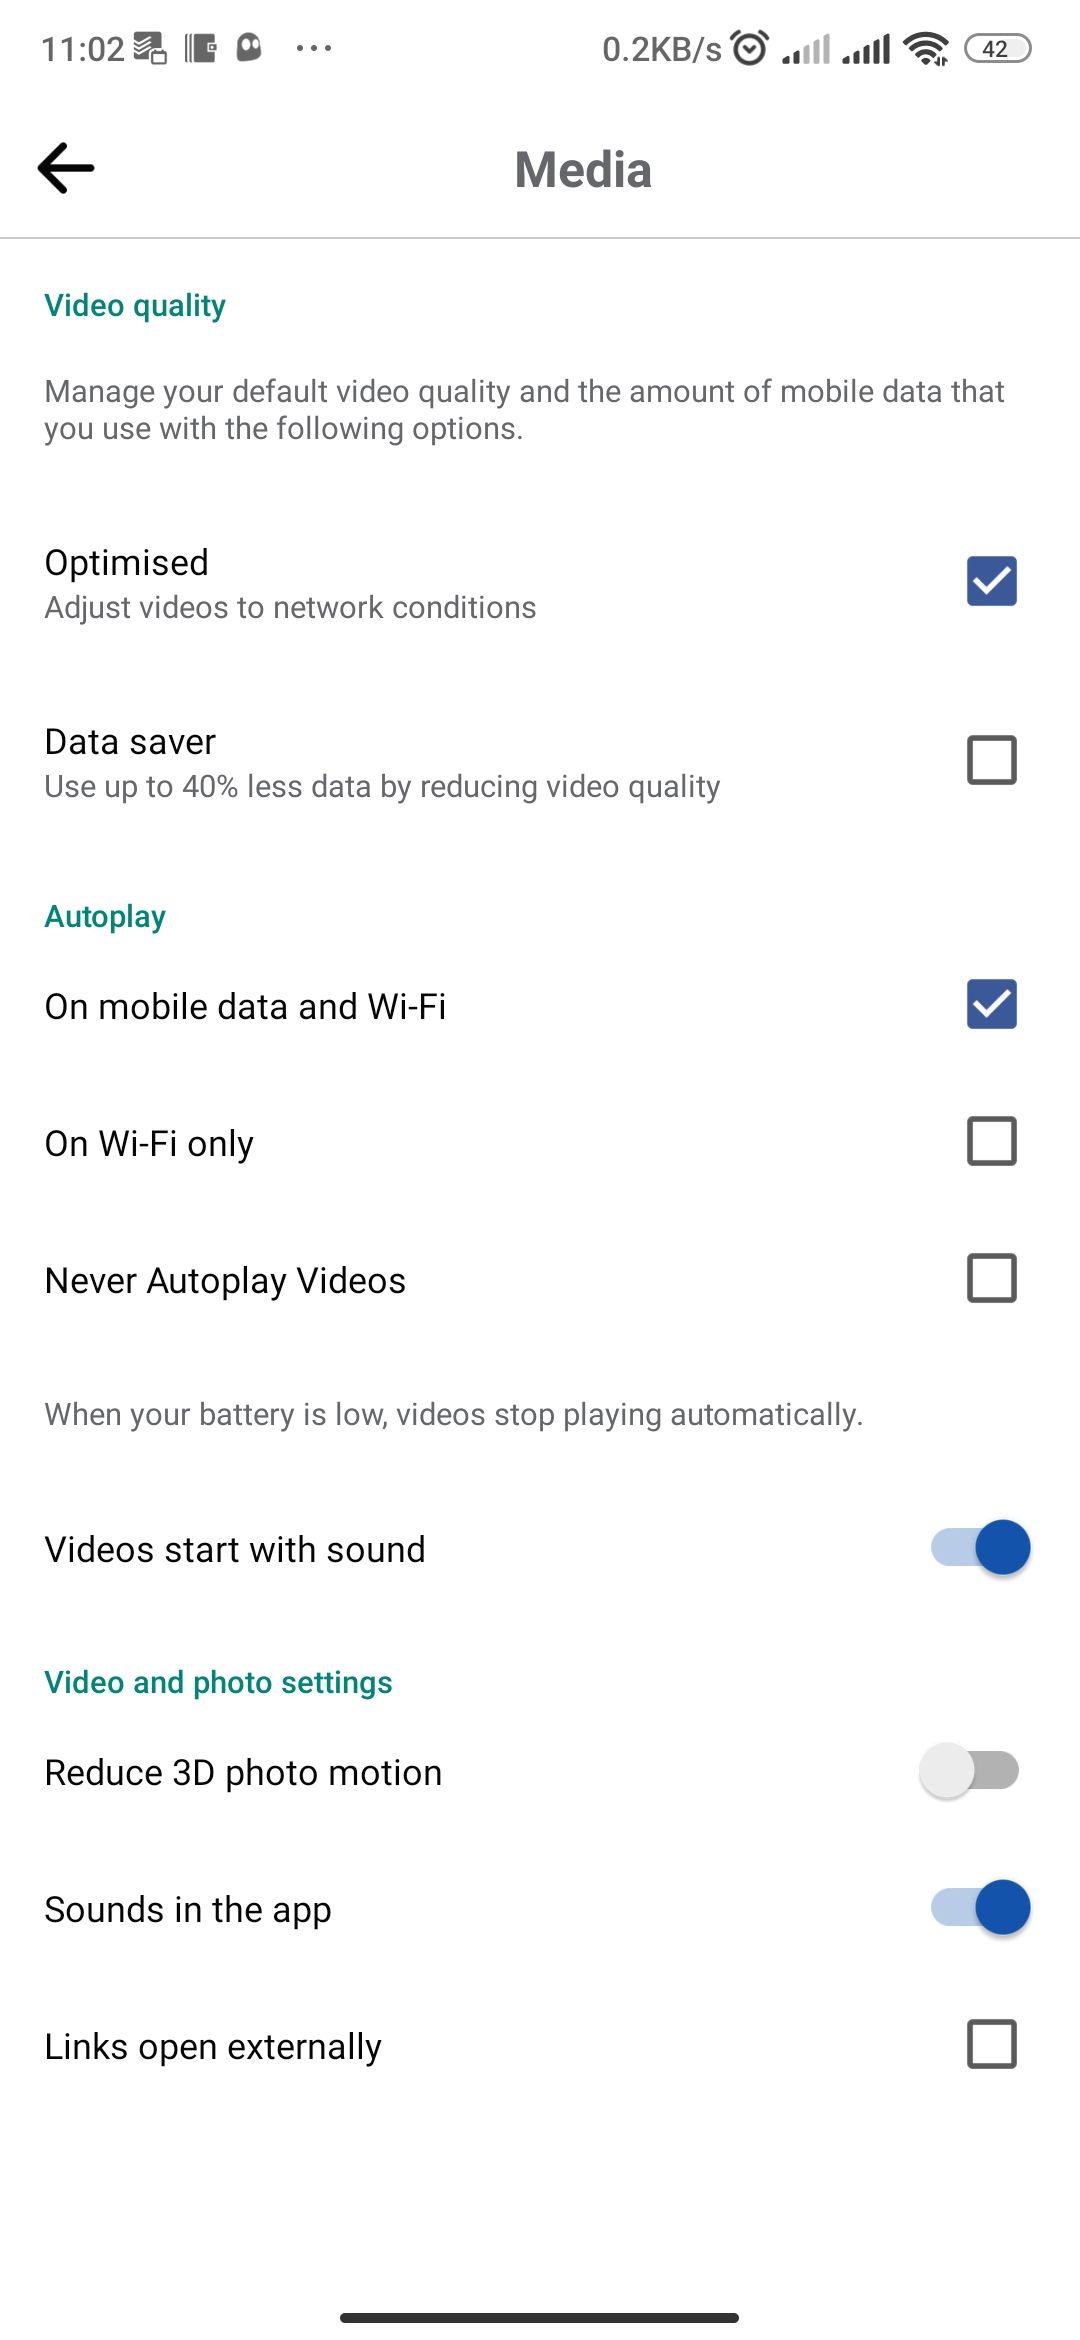 Facebook Android Media settings page